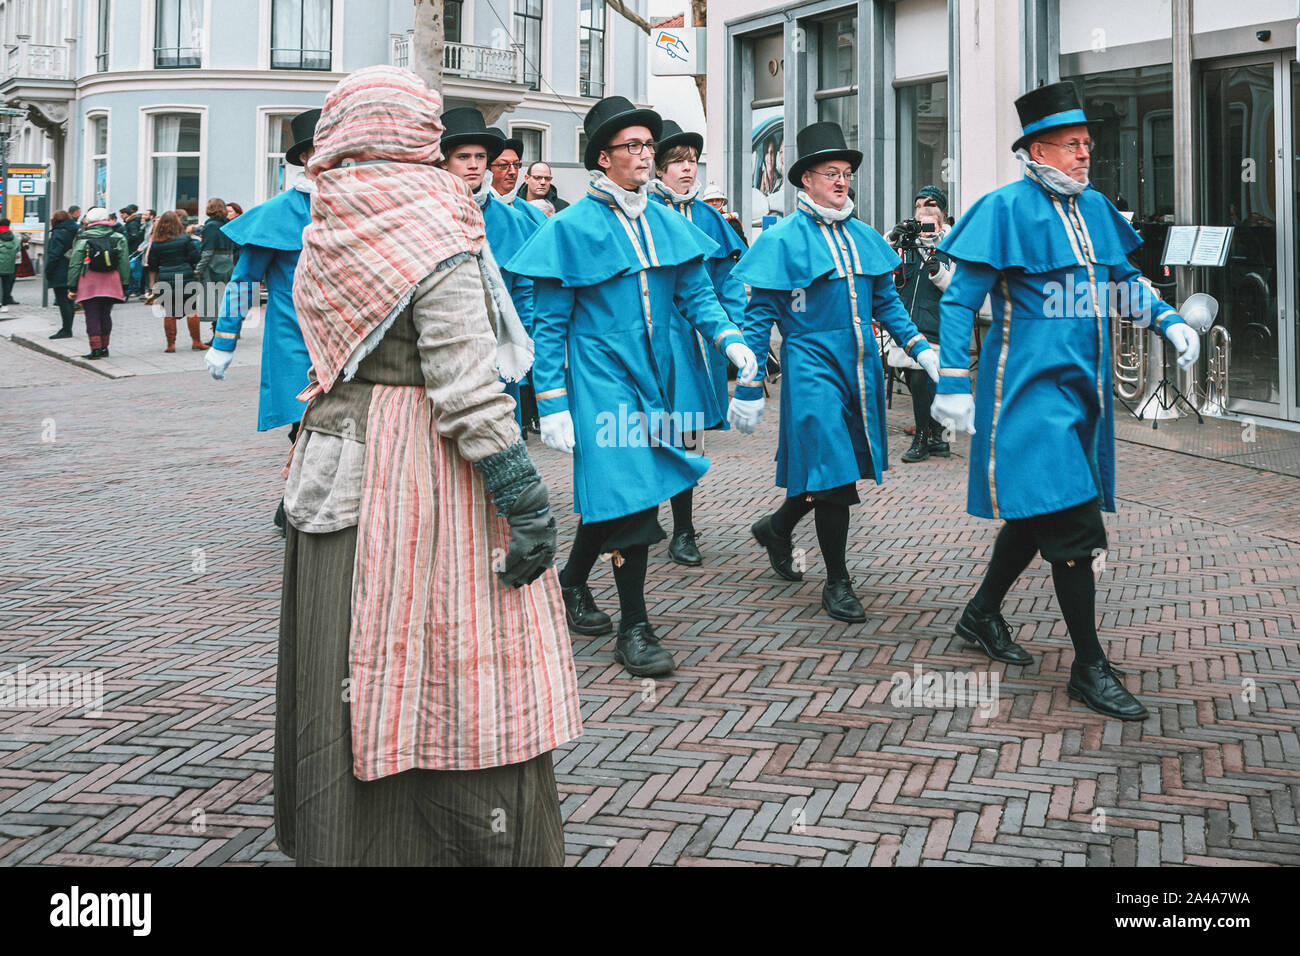 Deventer, Netherlands, December 15, 2018: Procession of men dressed in blue Victorian costume during the Dickens Festival in Deventer Stock Photo